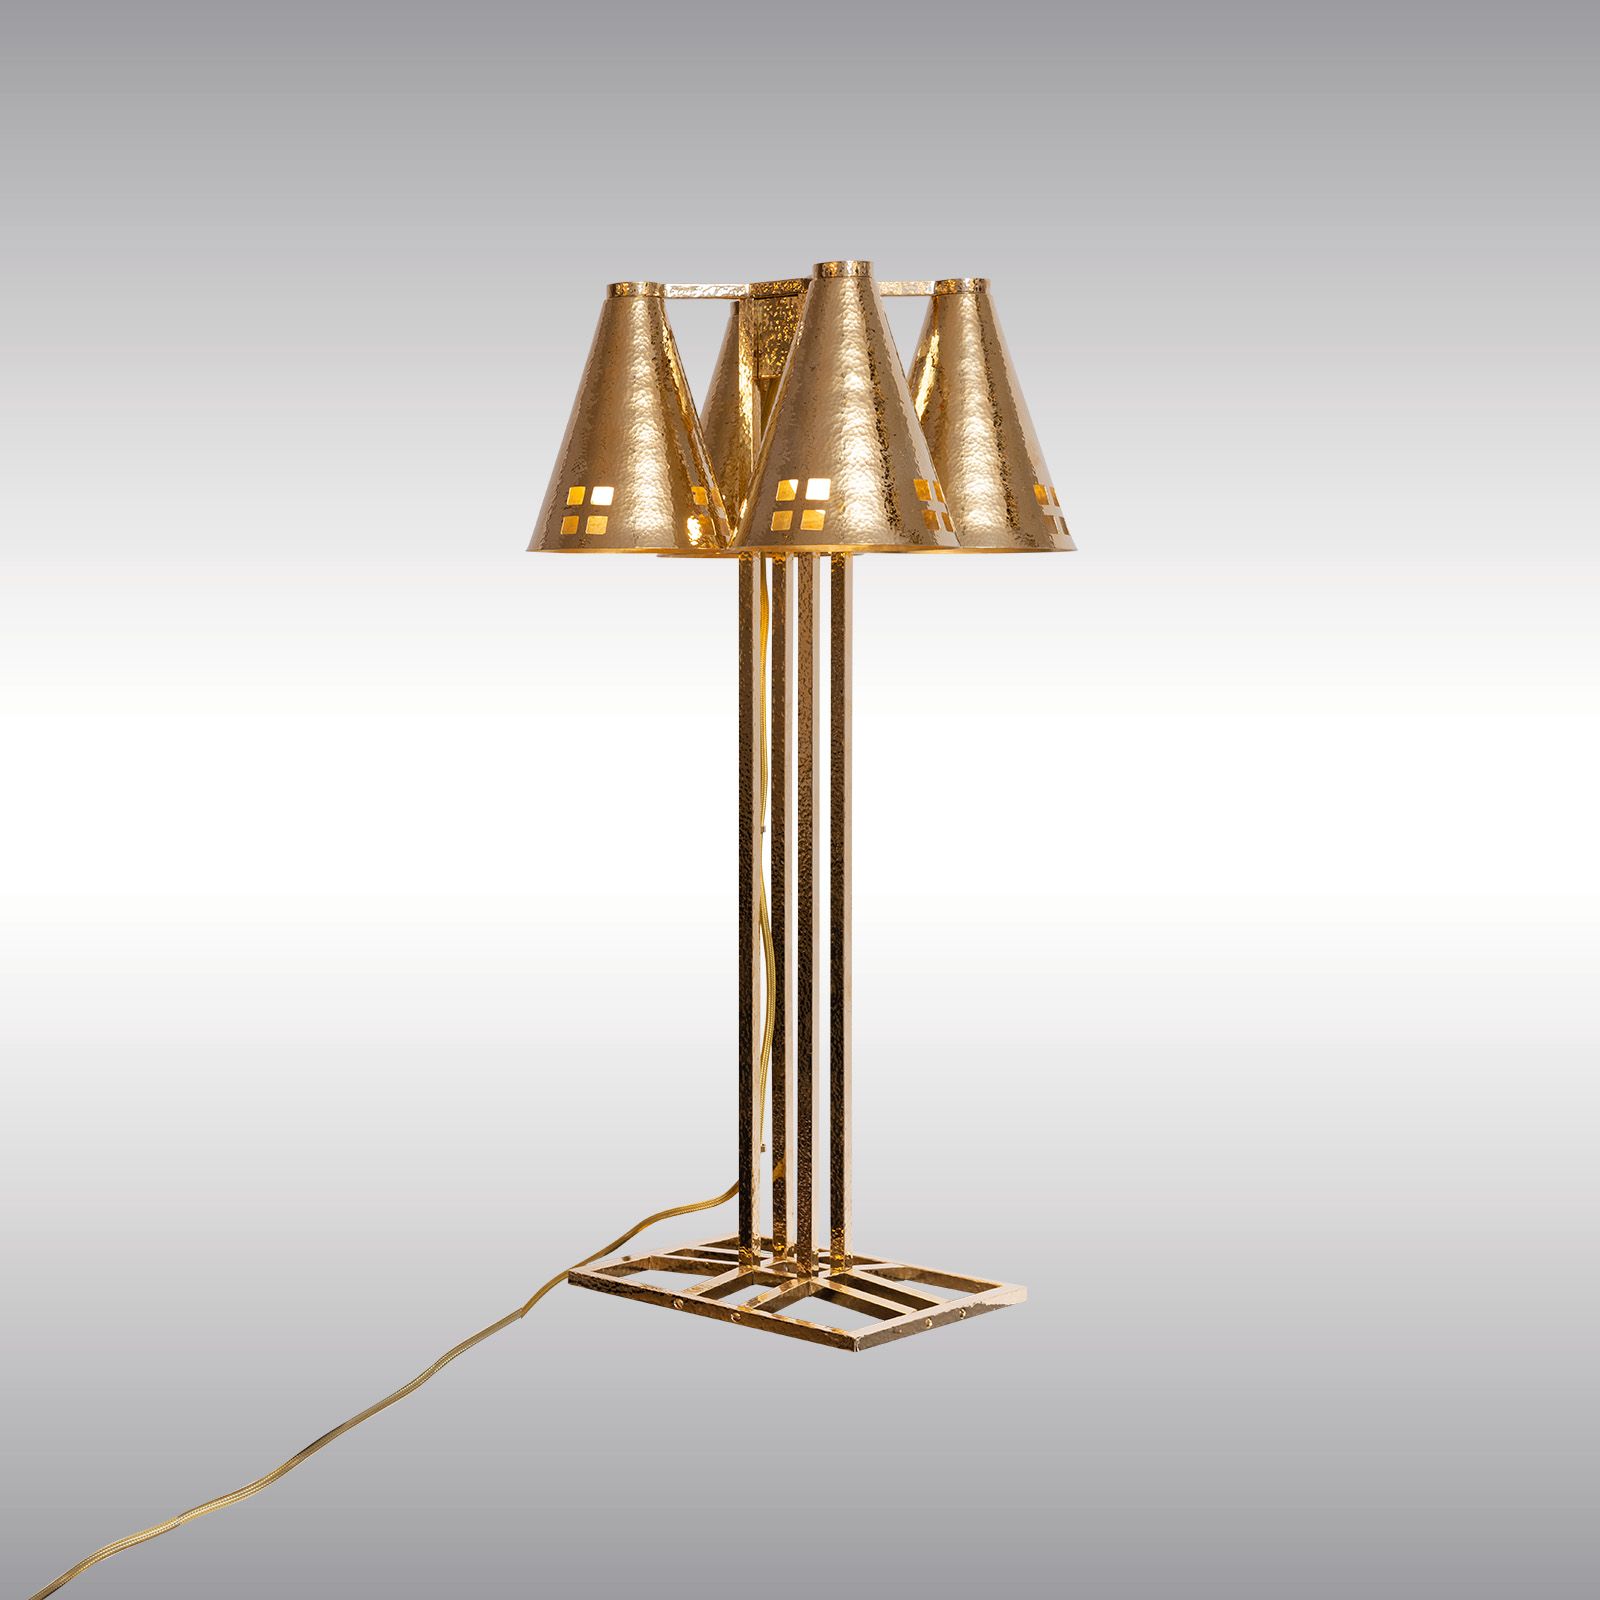 WOKA LAMPS VIENNA - OrderNr.:  22002|Cubistic Josef Hoffmann Table Lamp from 1903